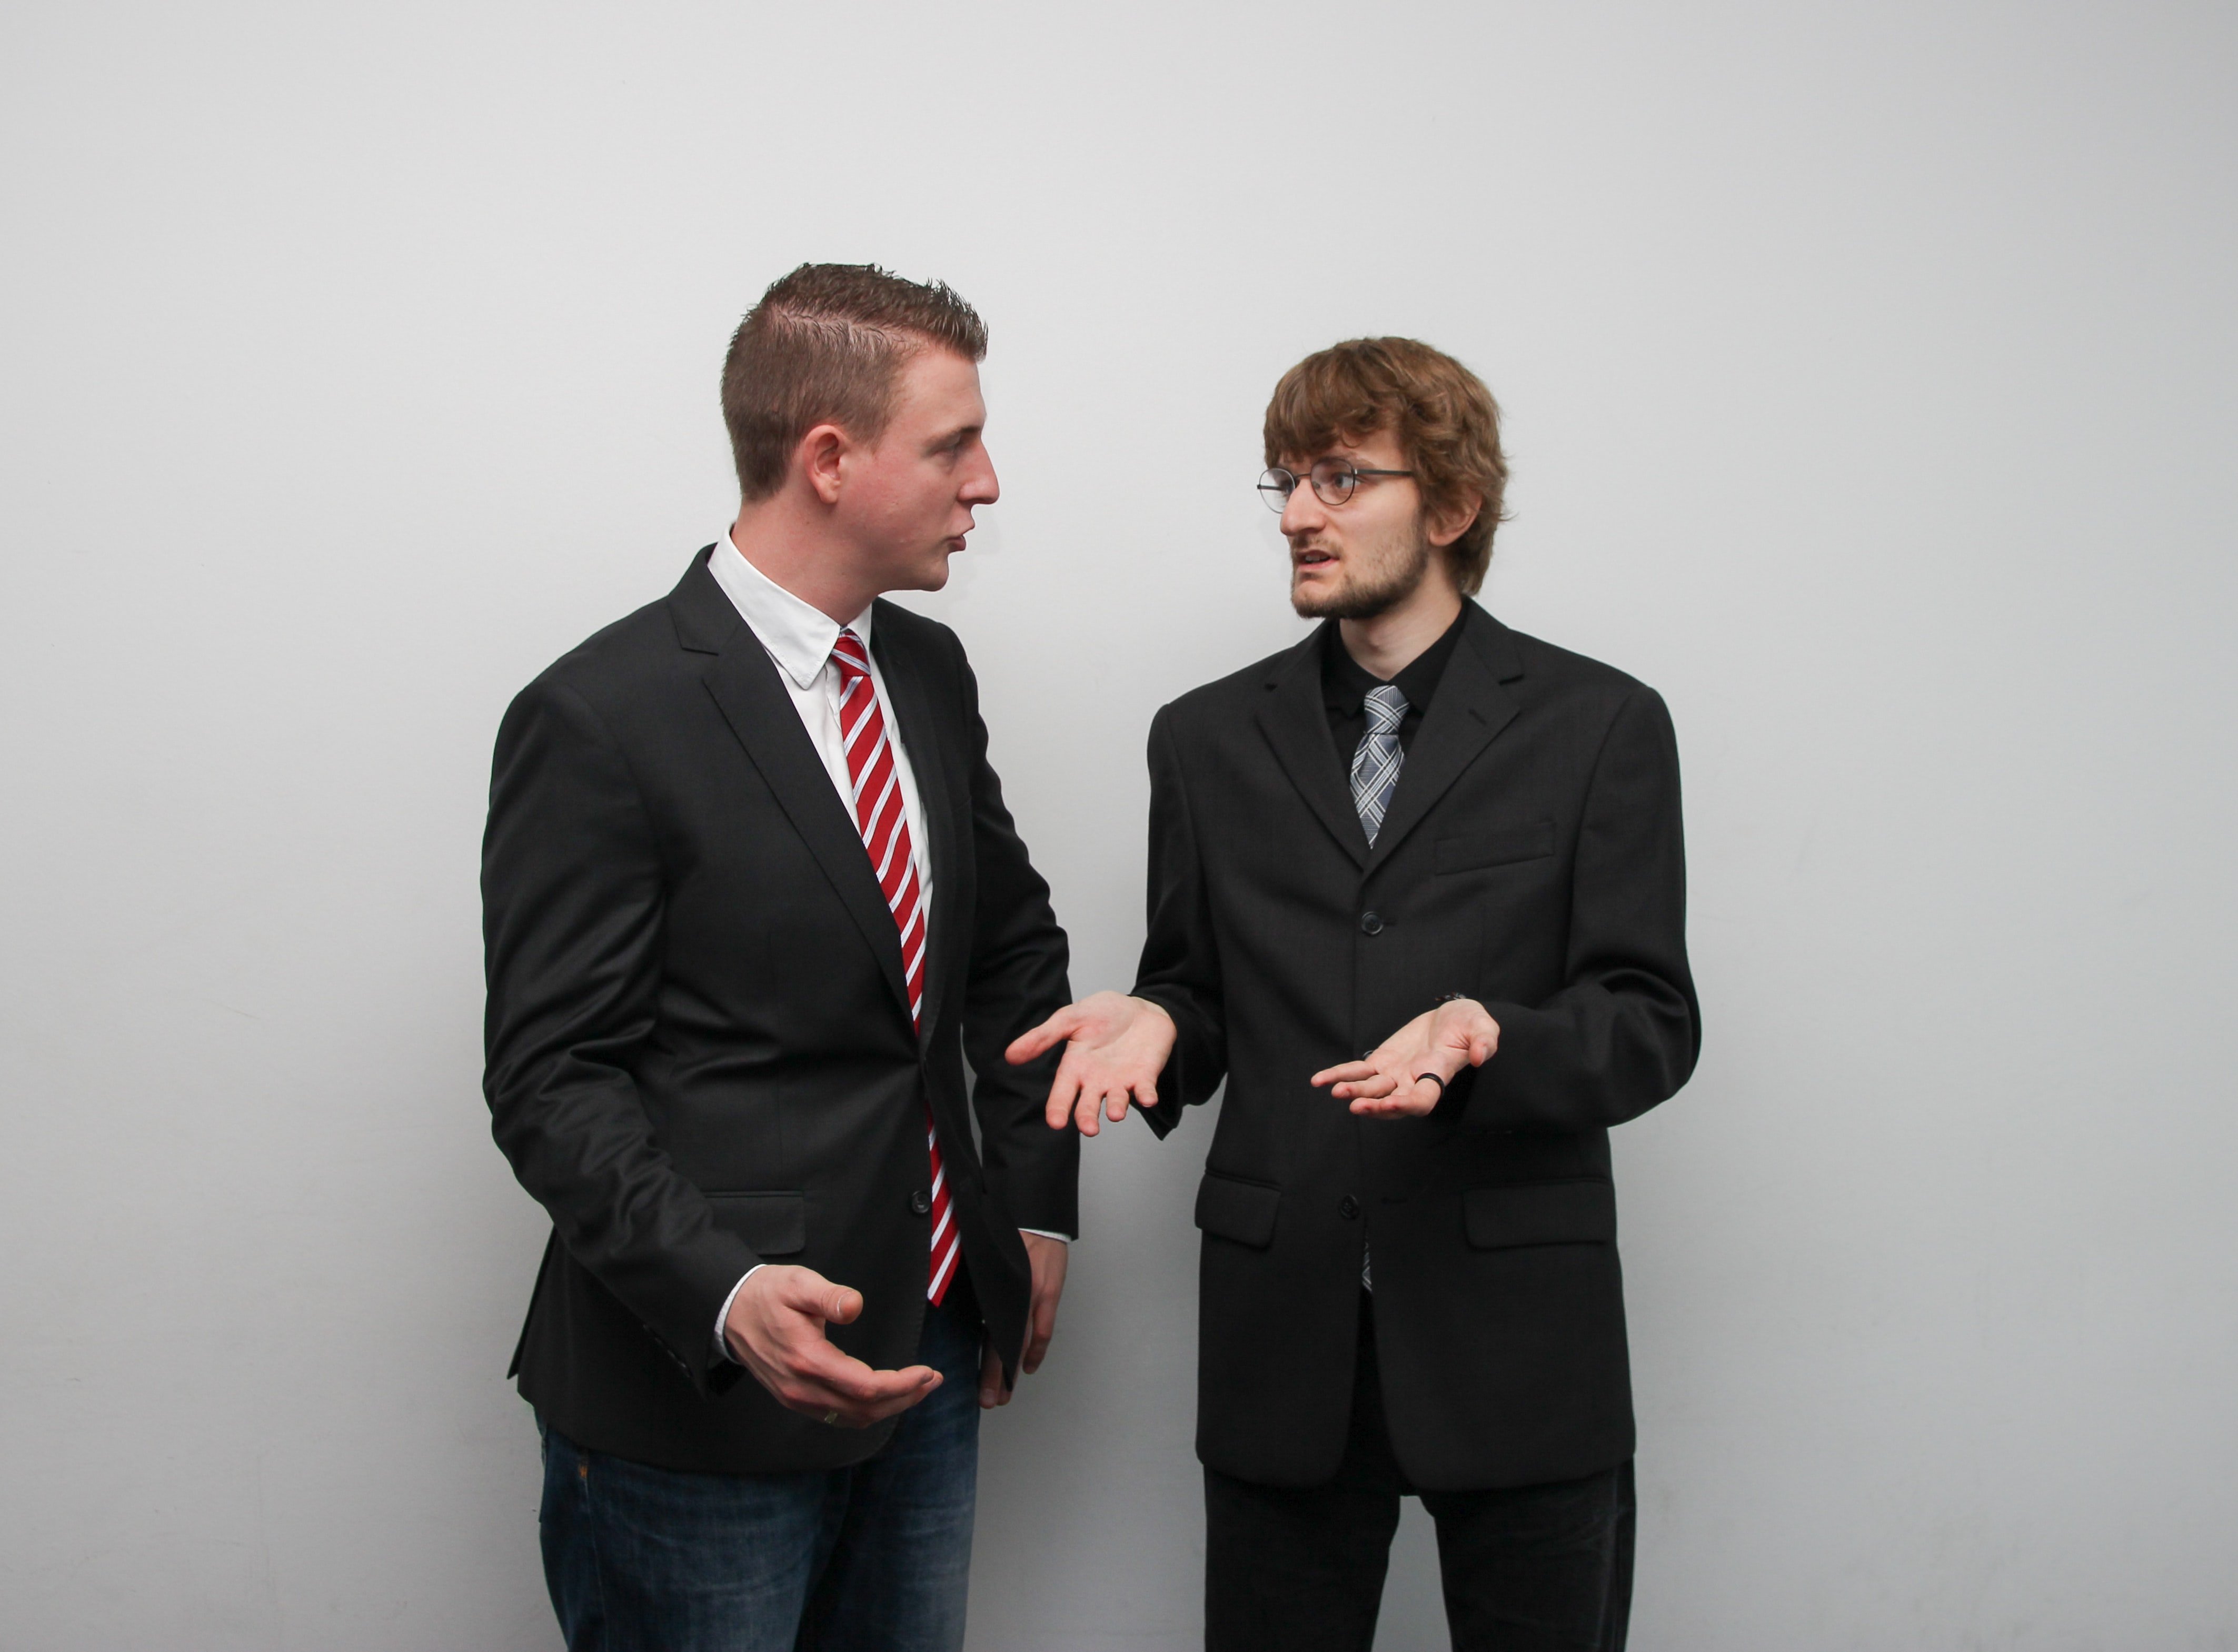 Two men involved in a heated argument | Photo: Unsplash